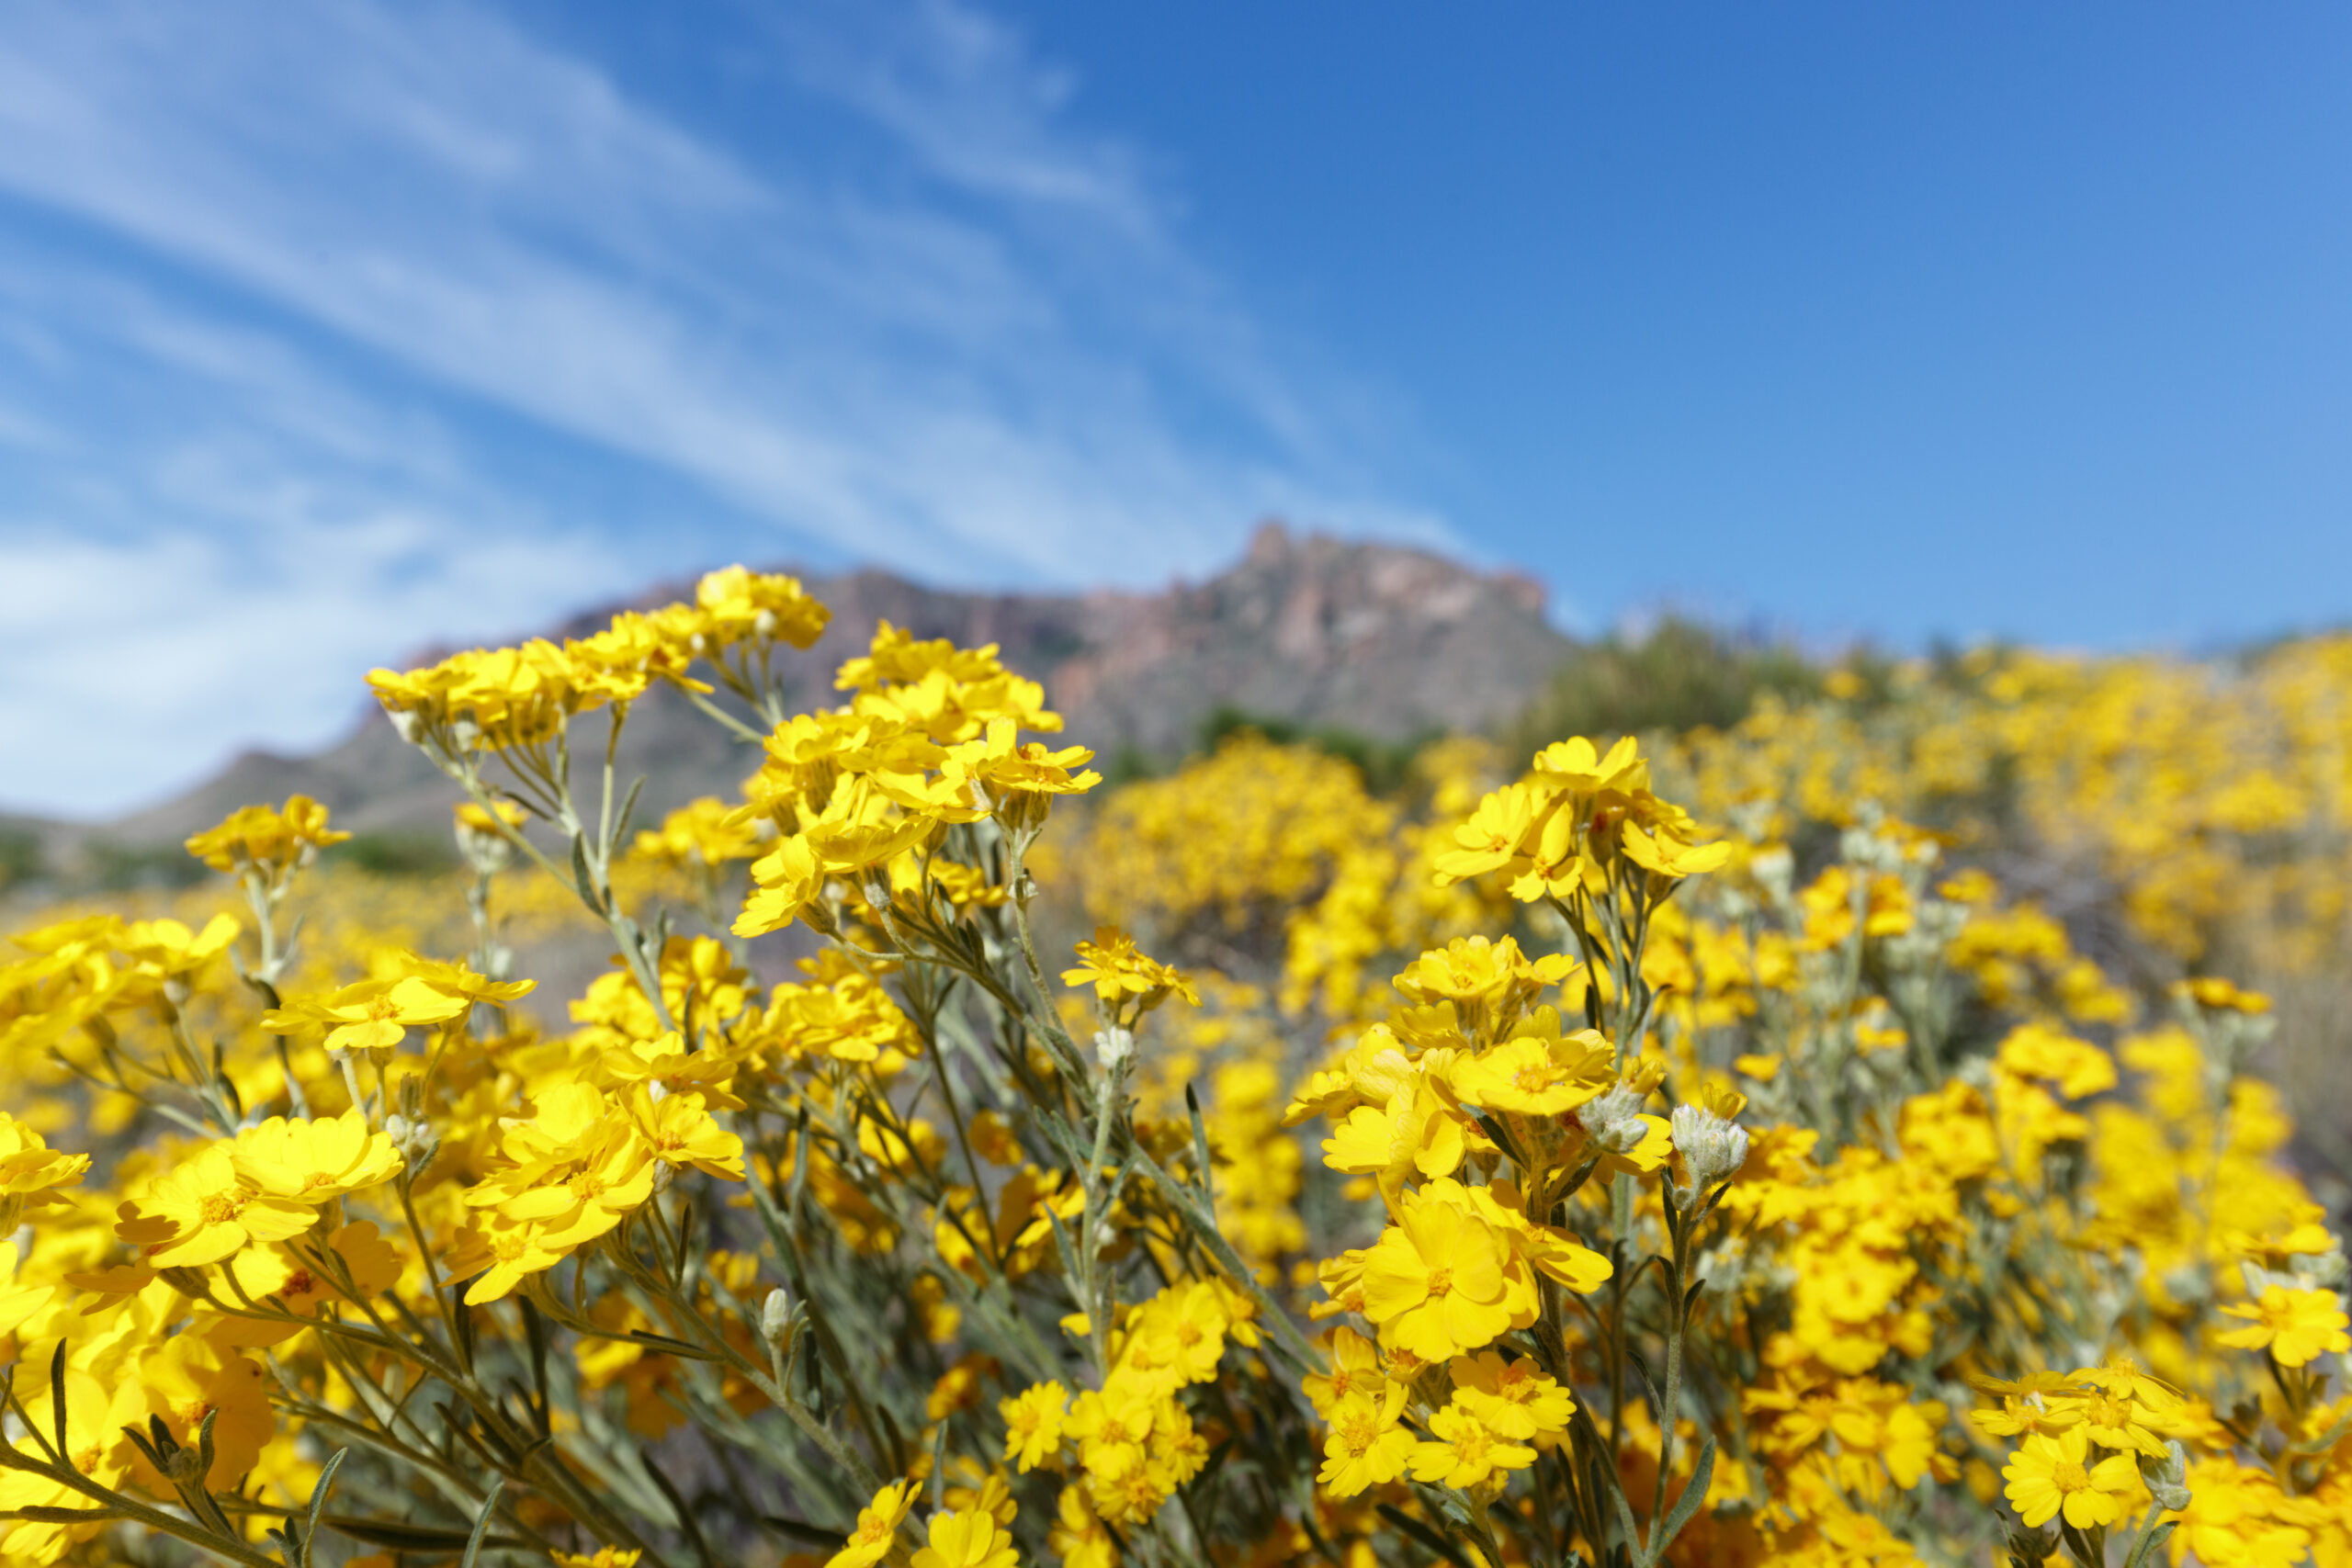 Field of yellow flowers with mountains and blue sky in the background.